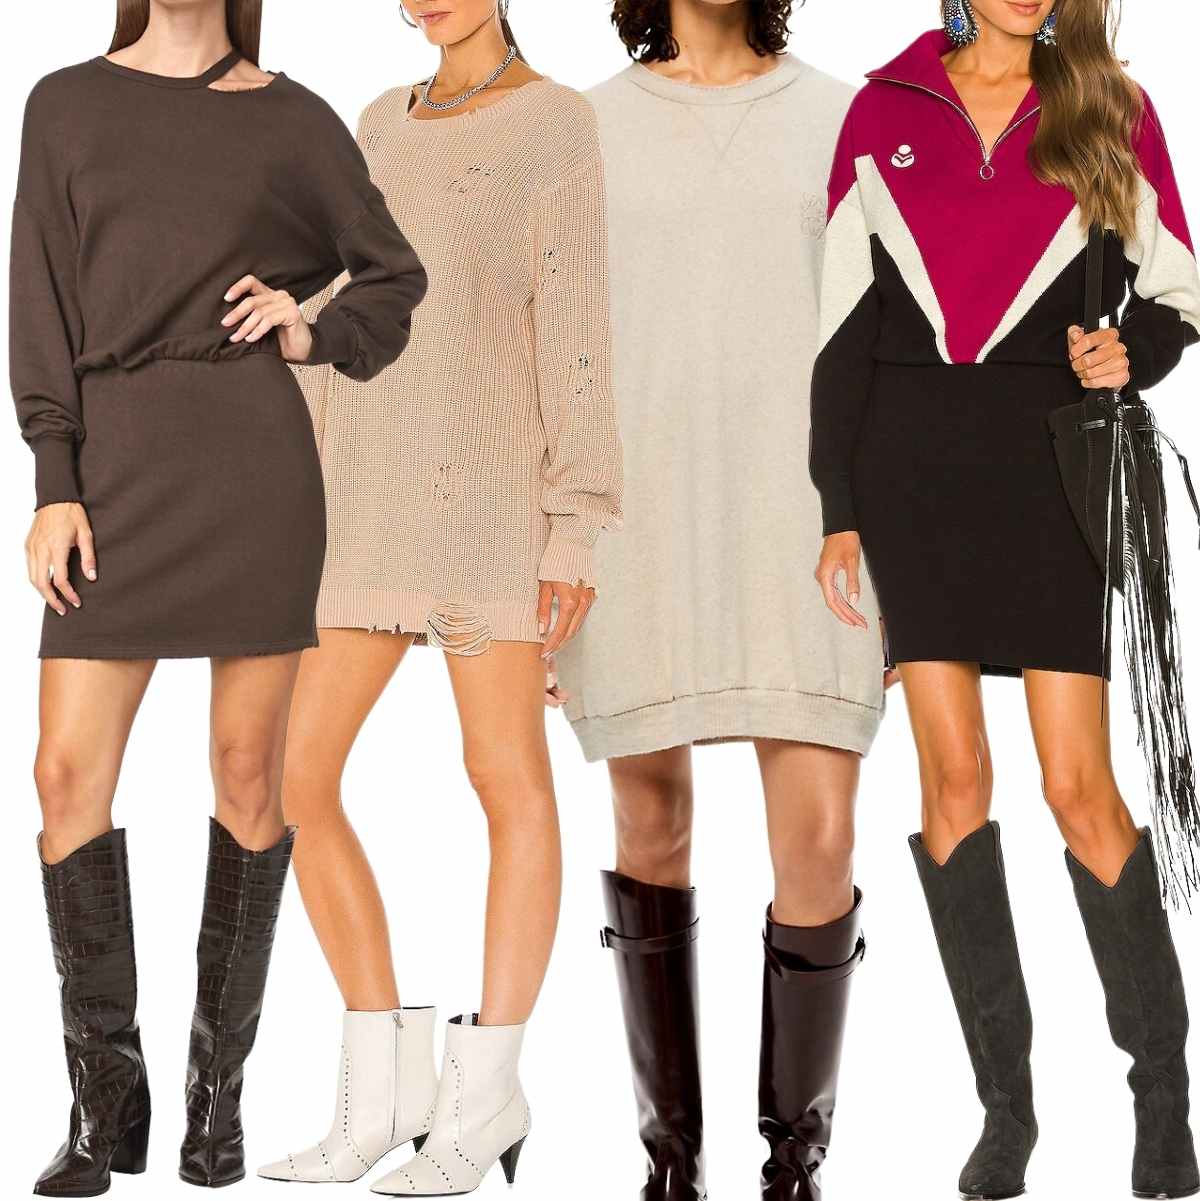 Collage of 4 women wearing a Sweatshirt dress with cowboy boots.